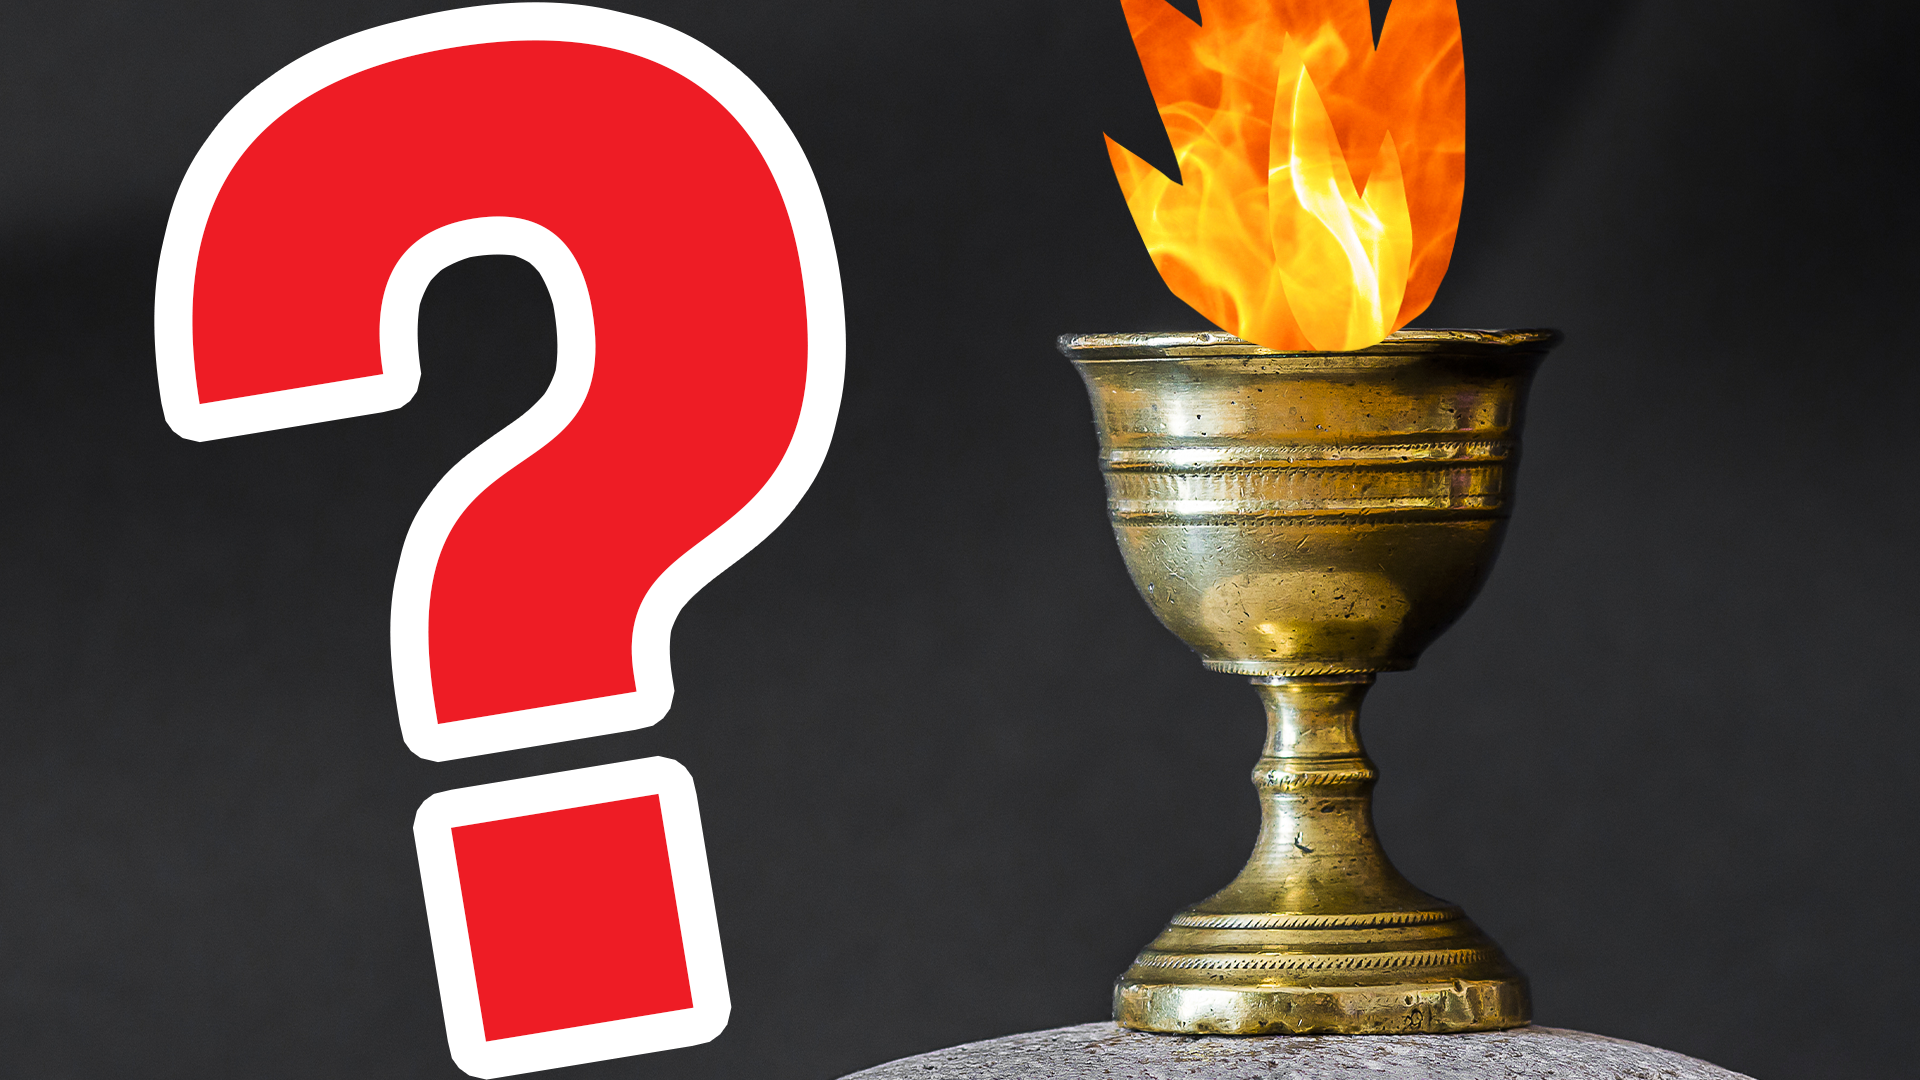 A goblet of fire and a question mark